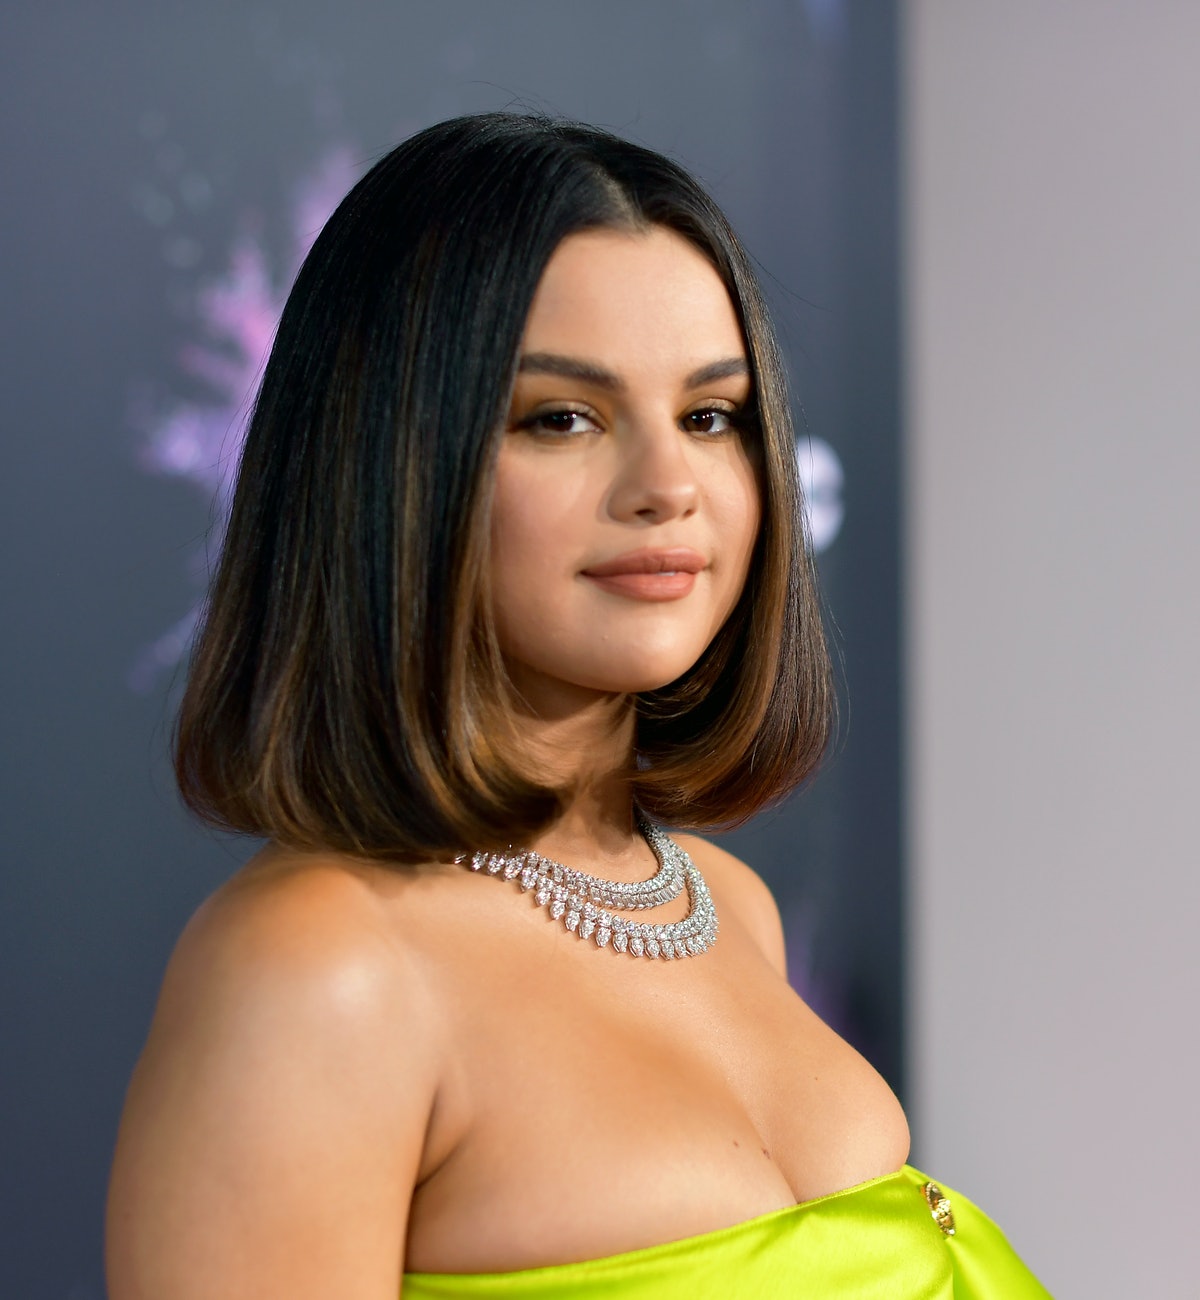 Selena Gomez (singer) Age, Biography, Wiki, Height, Weight, Relationship, Net Worth, Birth, Career, Facts